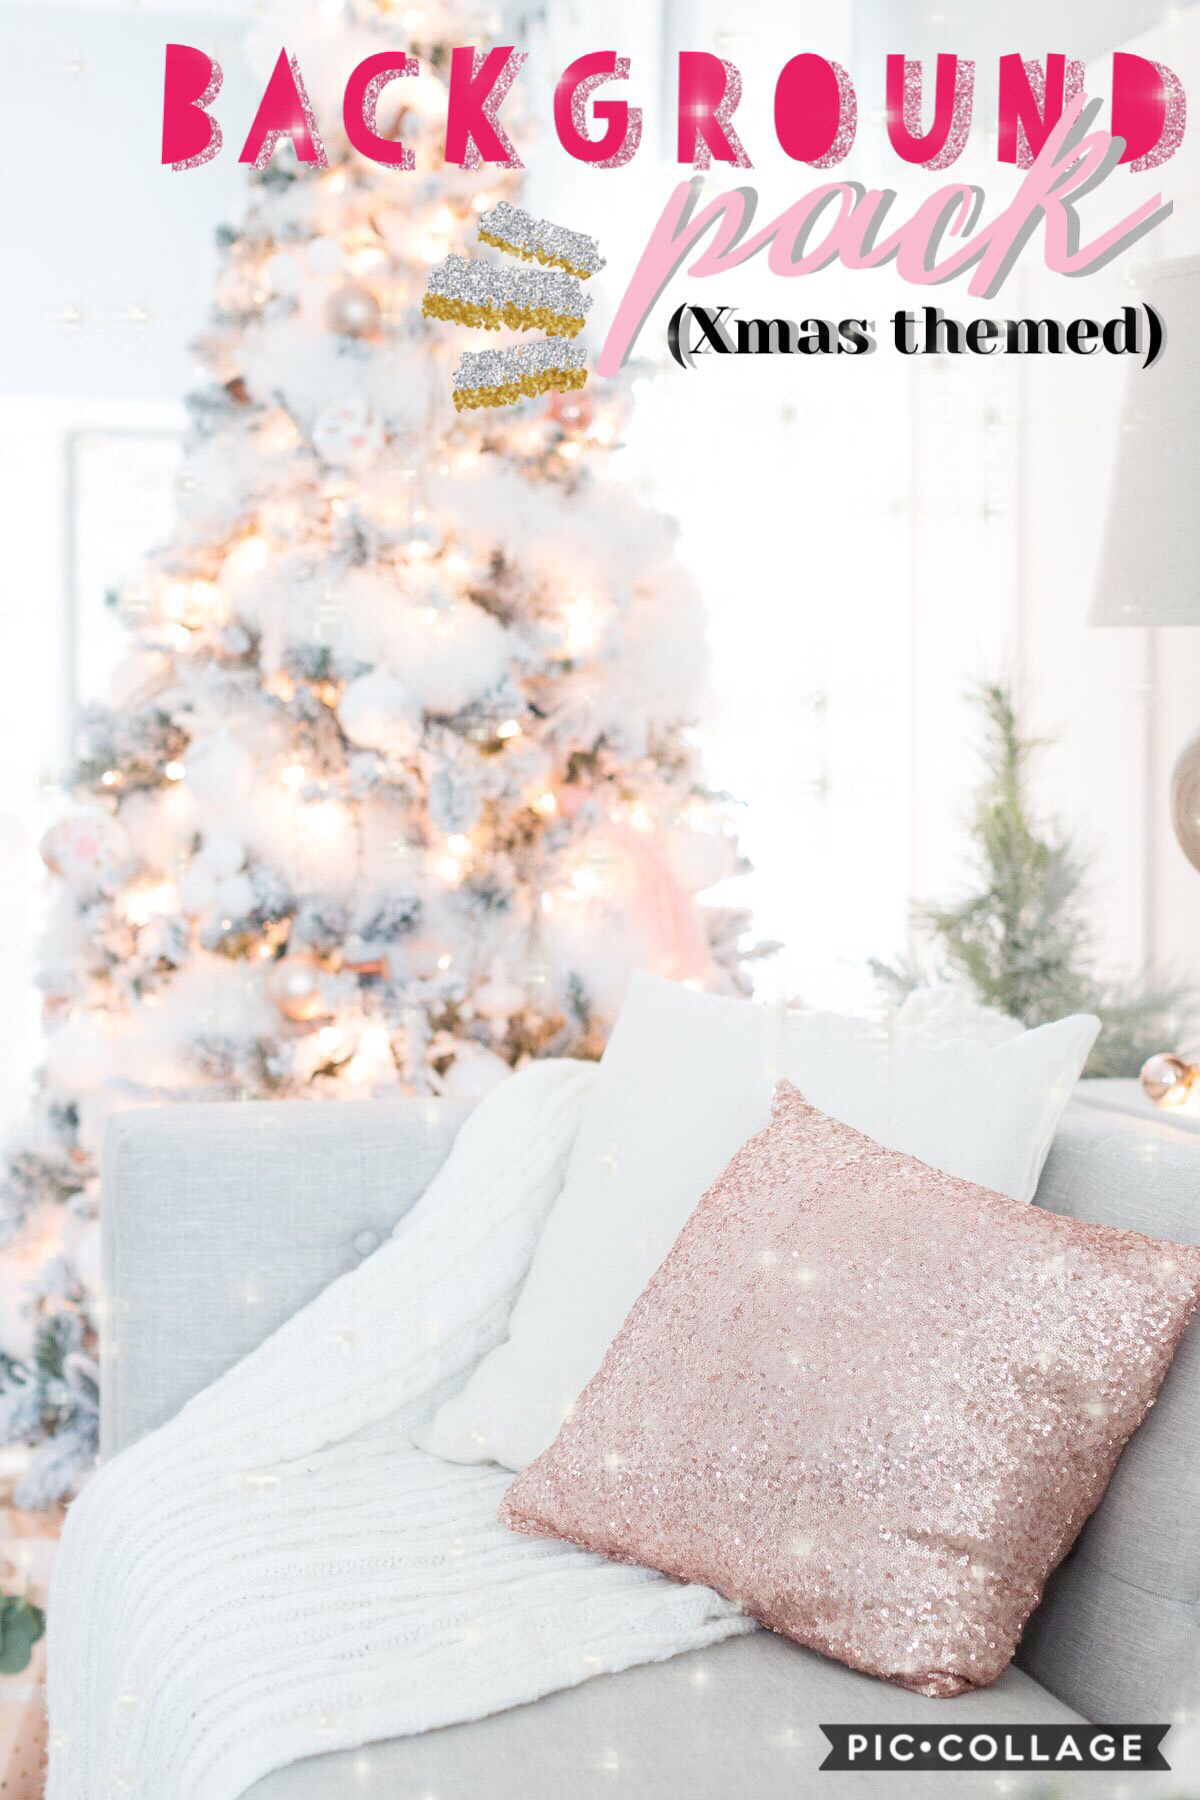 💖 Tap 💖
Background Pack - Christmas themed
Hope you guys like it 😘
I'm so sorry we've been inactive on this account lately - we'll try to be more active
See you guys soon 💖💖💖💖